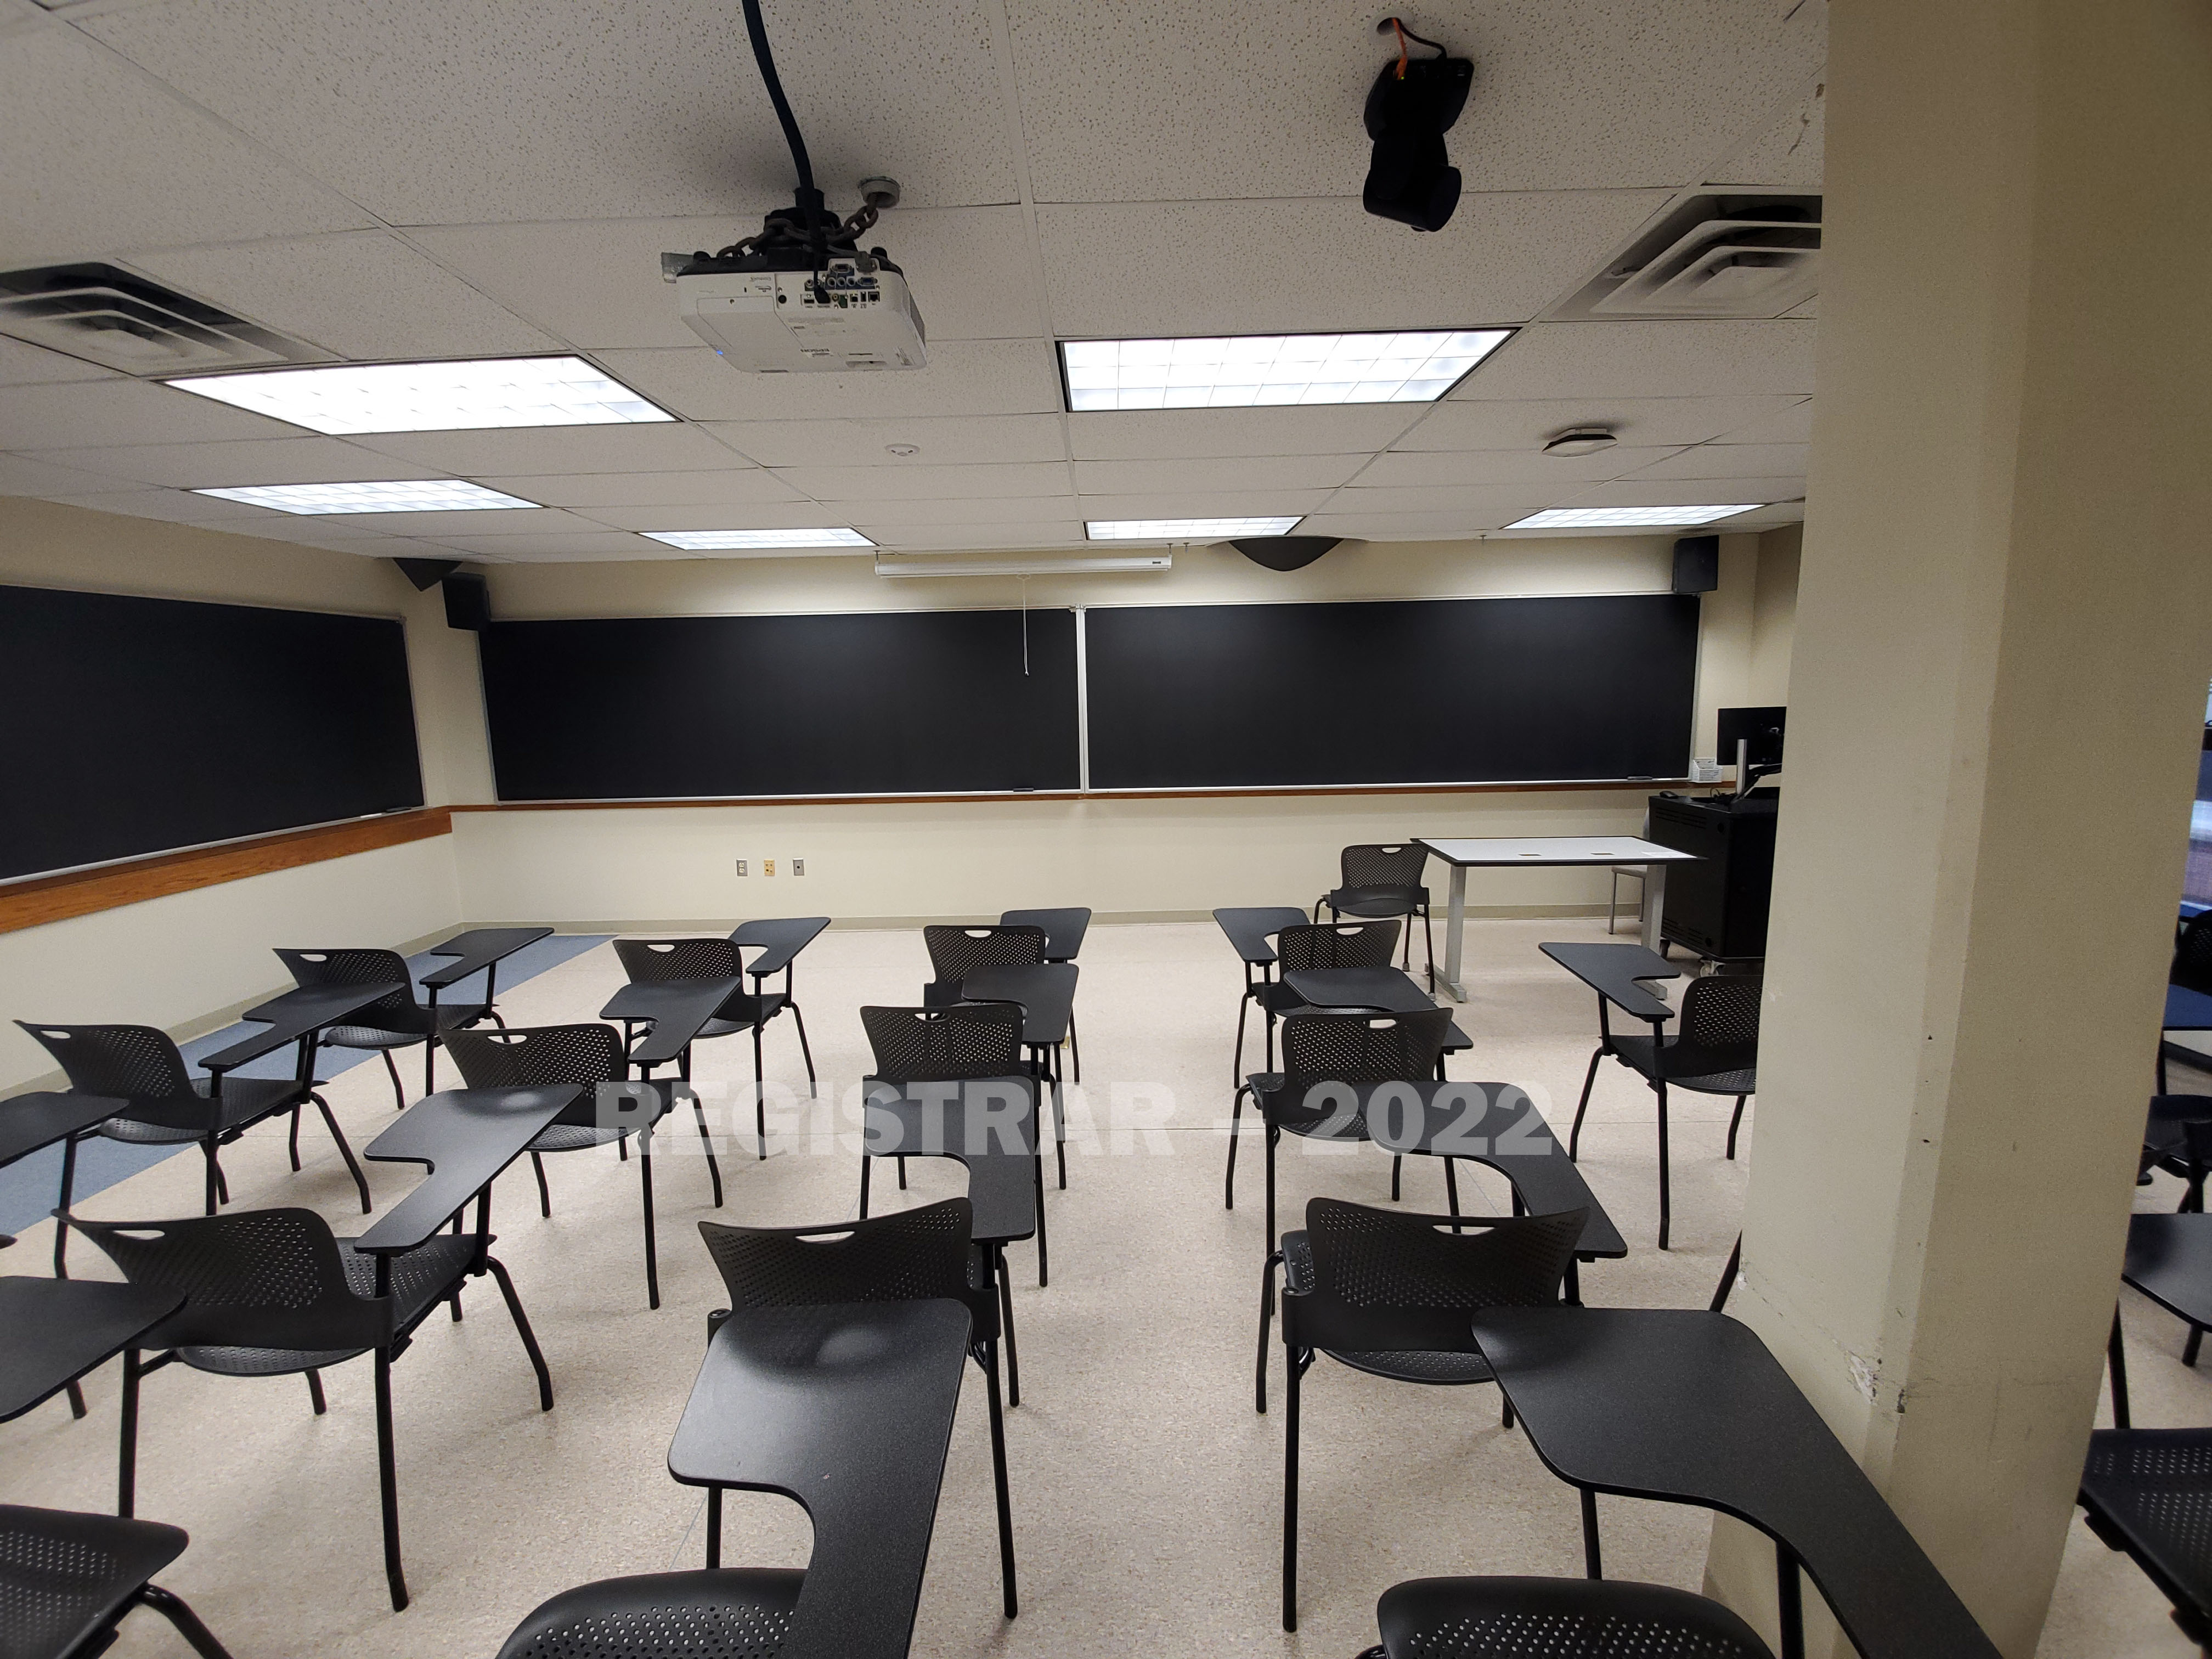 Enarson Classroom Building room 322 ultra wide angle view from the back of the room